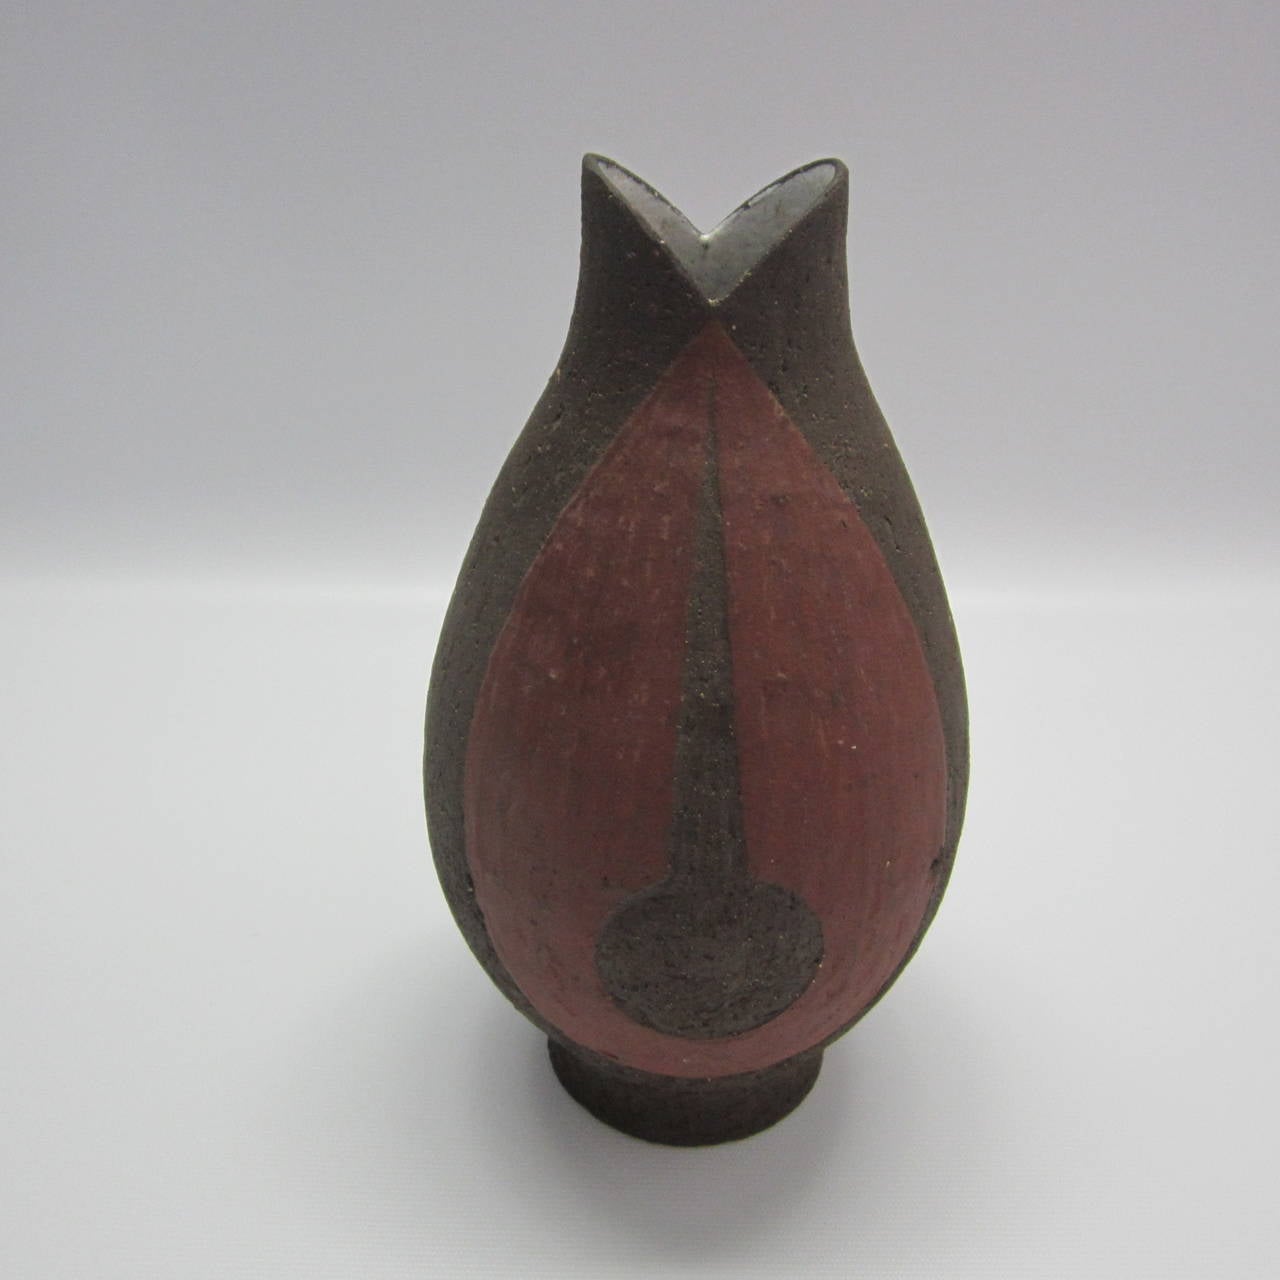 One of a kind Danish stoneware vase with rough texture two-tone exterior and raw-glaze interior. Stamped and marked.